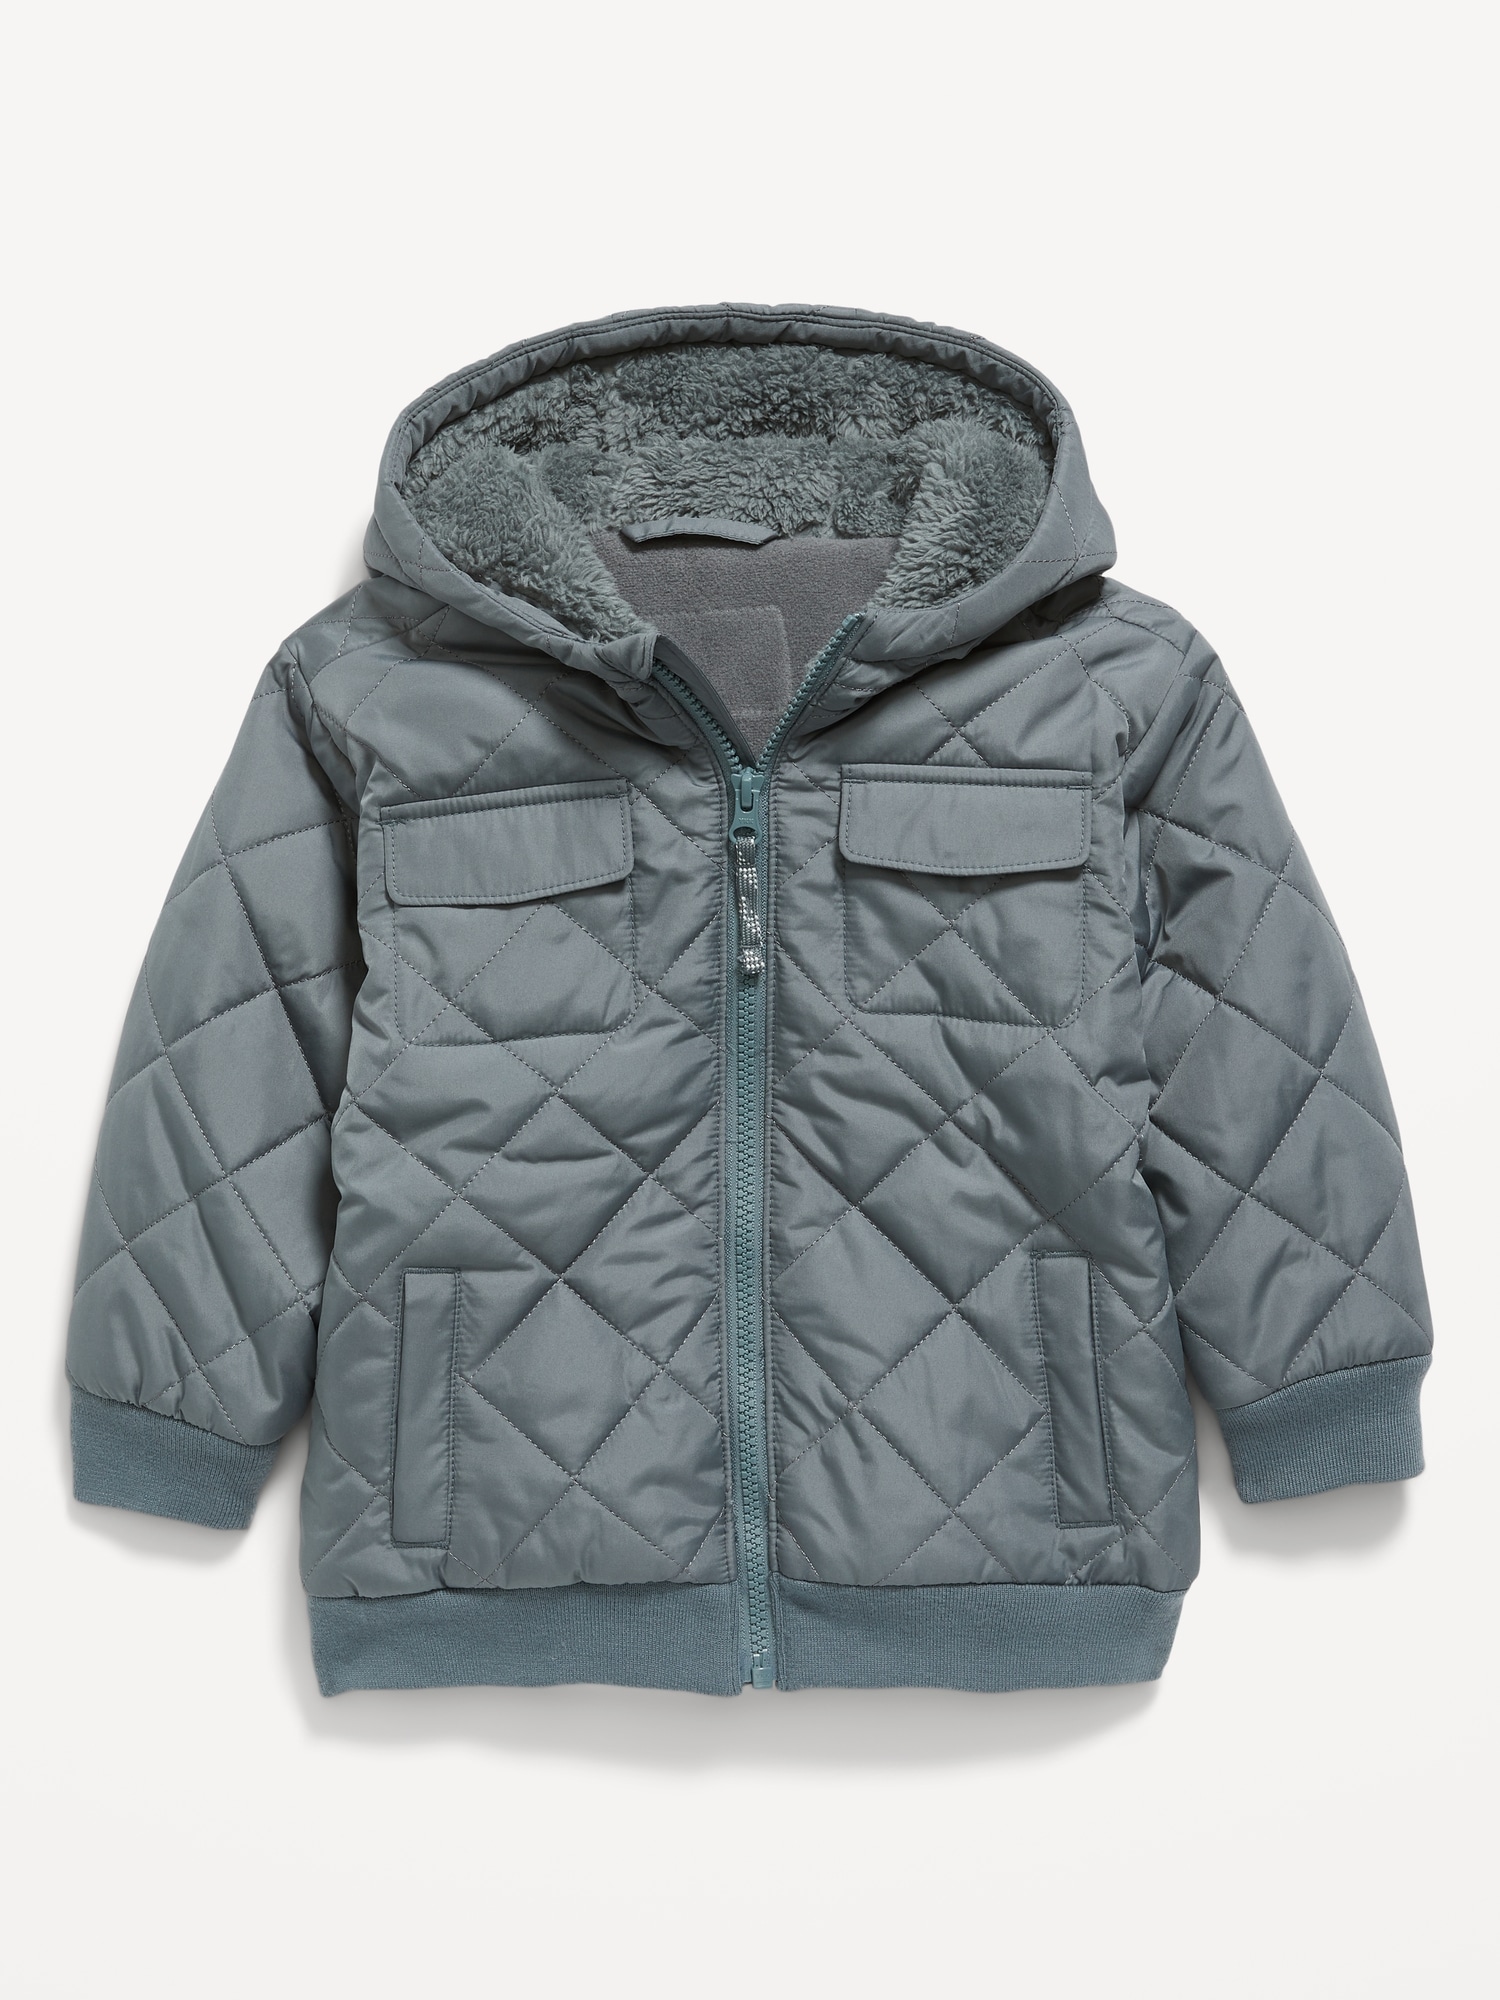 Unisex Hooded Water-Resistant Quilted Jacket for Toddler | Old Navy